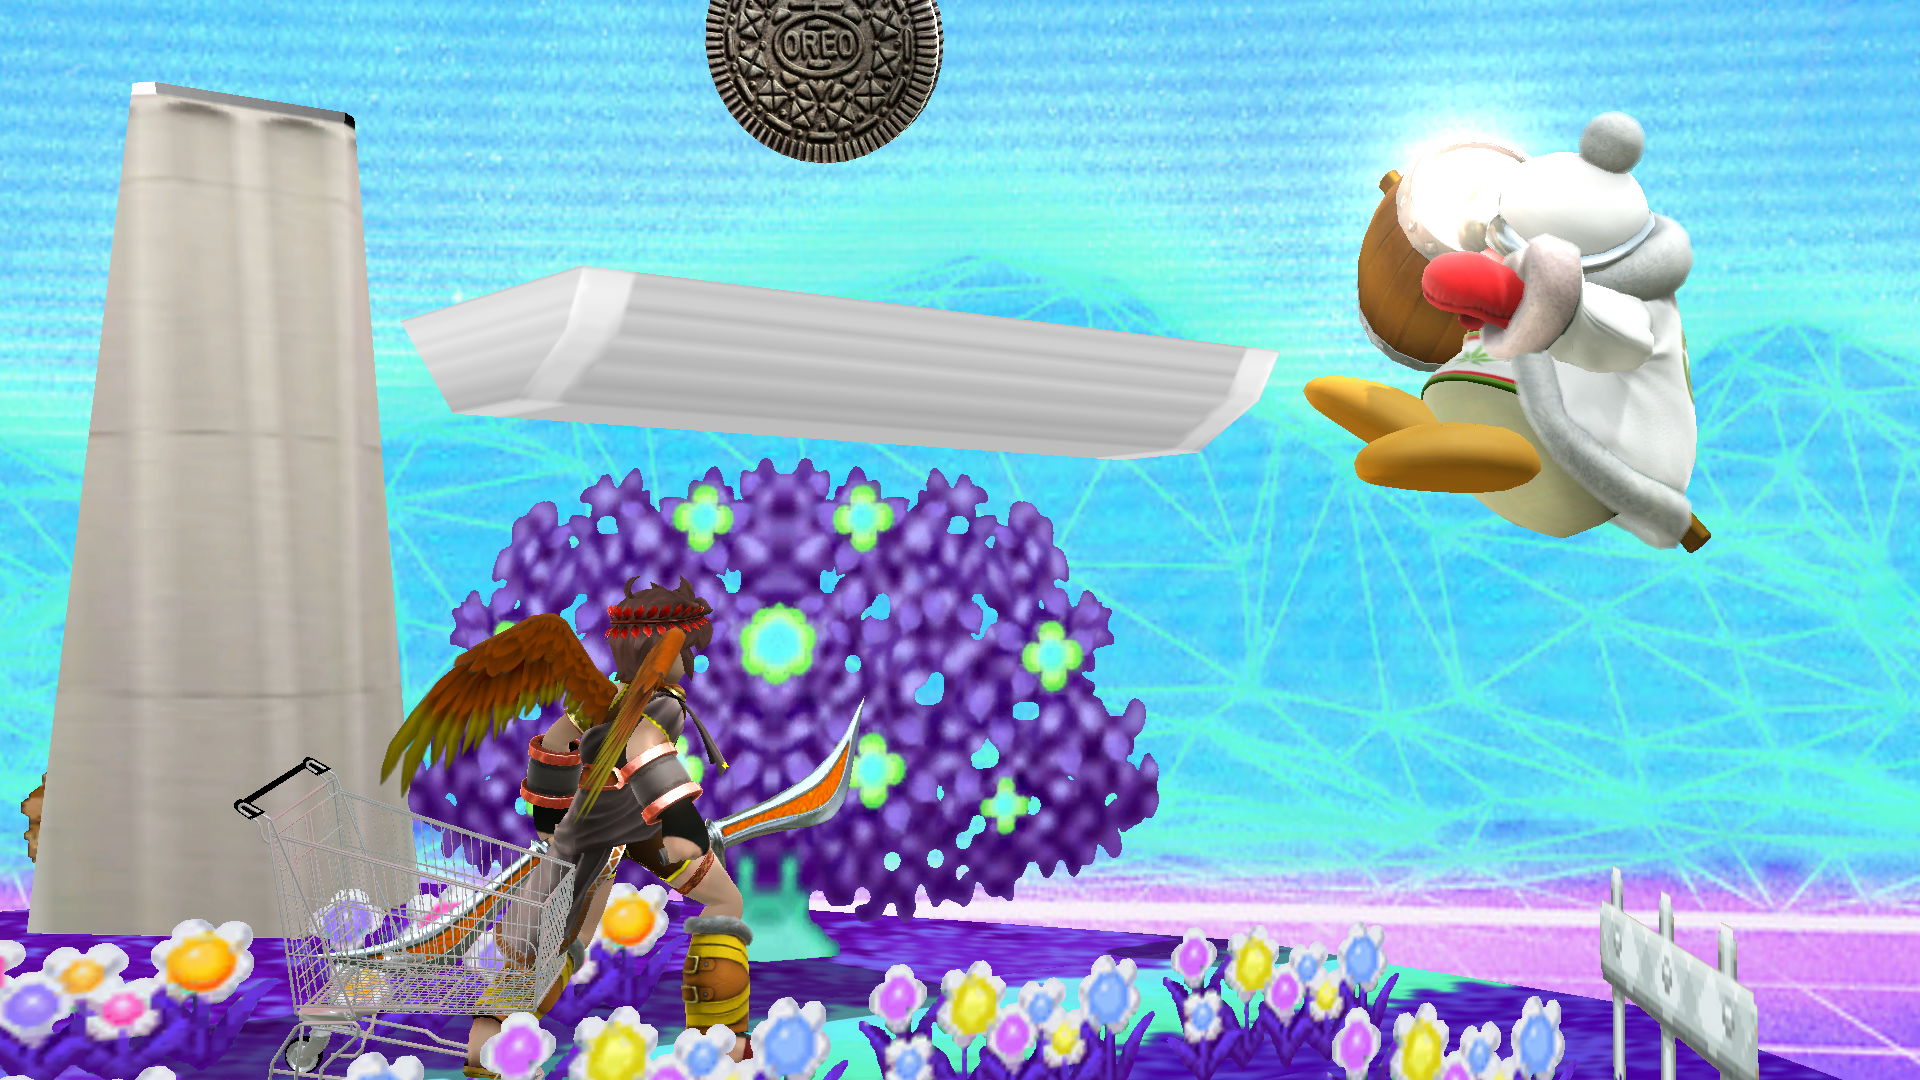 An Oreo, a shopping cart, King Weedede, and my girlfriend attempt to kill each other on a vaporwave stage